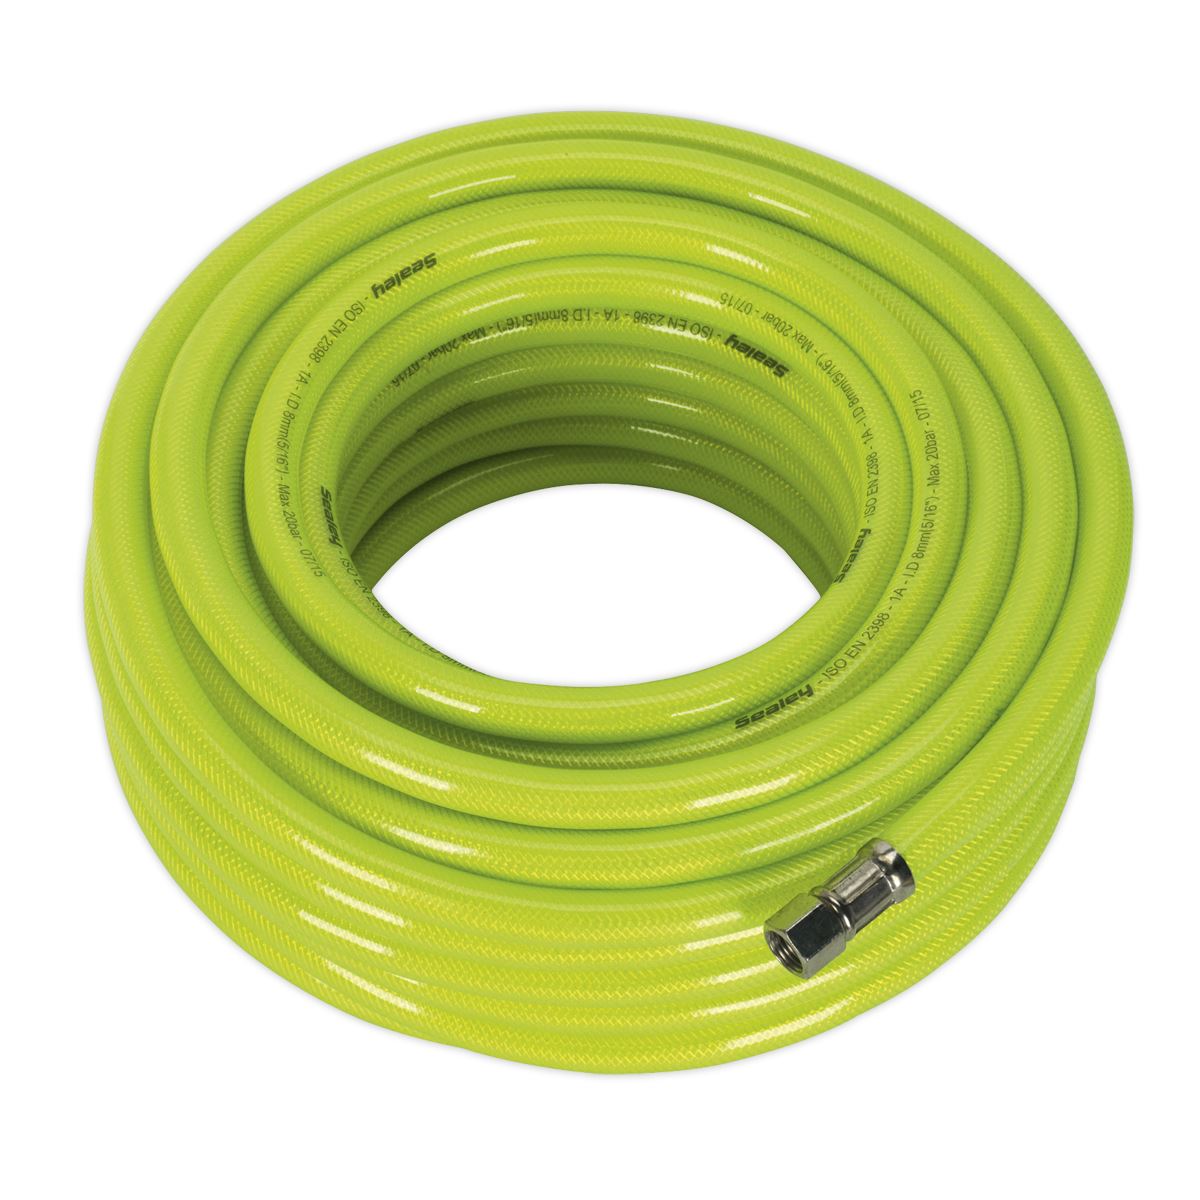 Sealey Air Hose High-Visibility 20m x Ø8mm with 1/4"BSP Unions